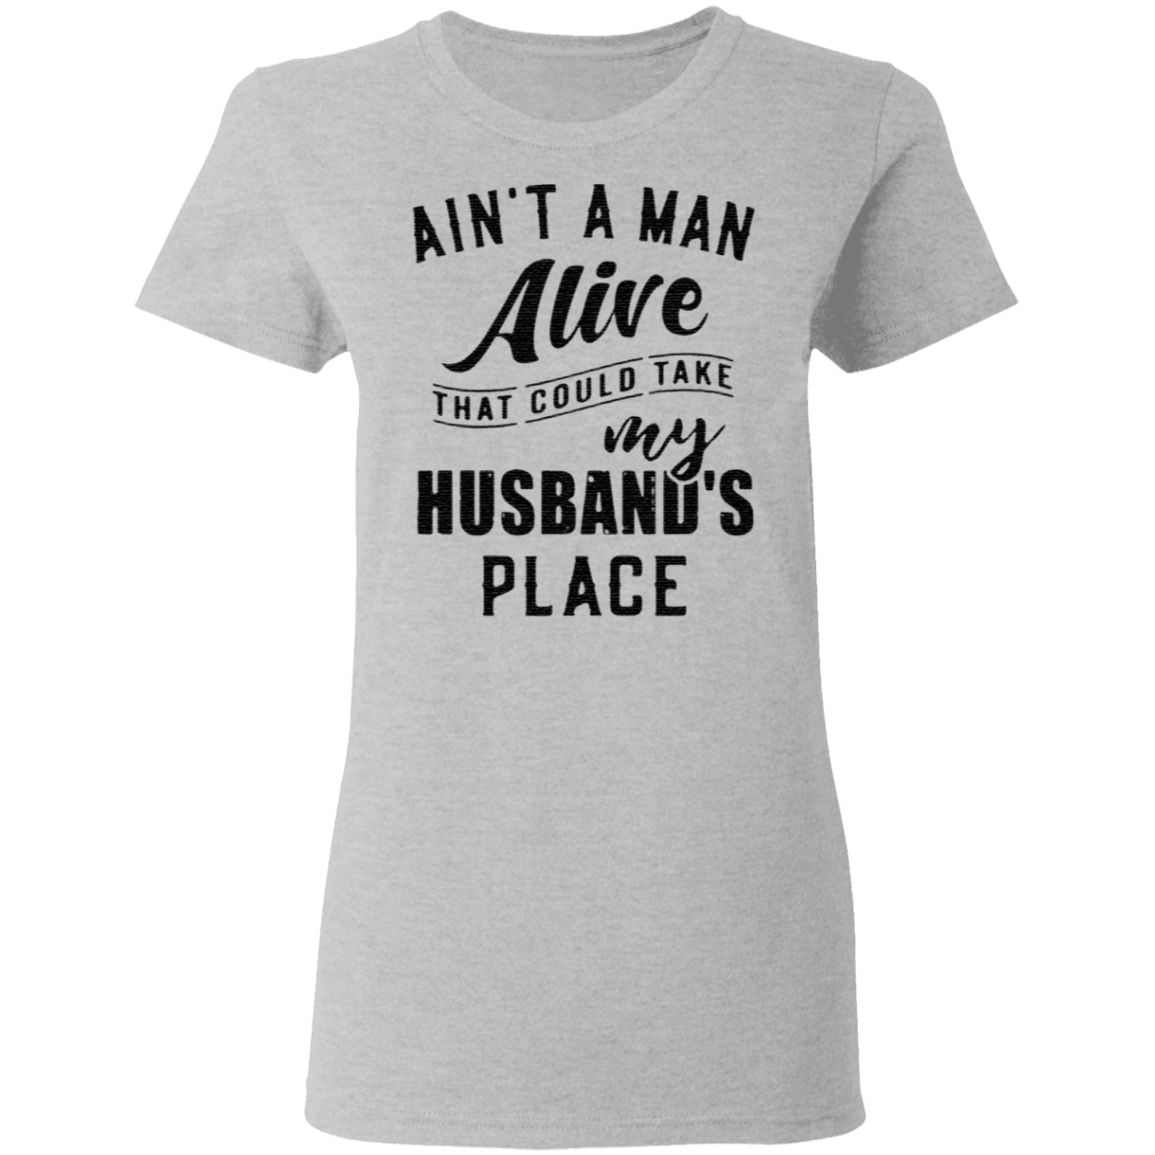 Ain’t a man alive that could take my husband’s place t shirt